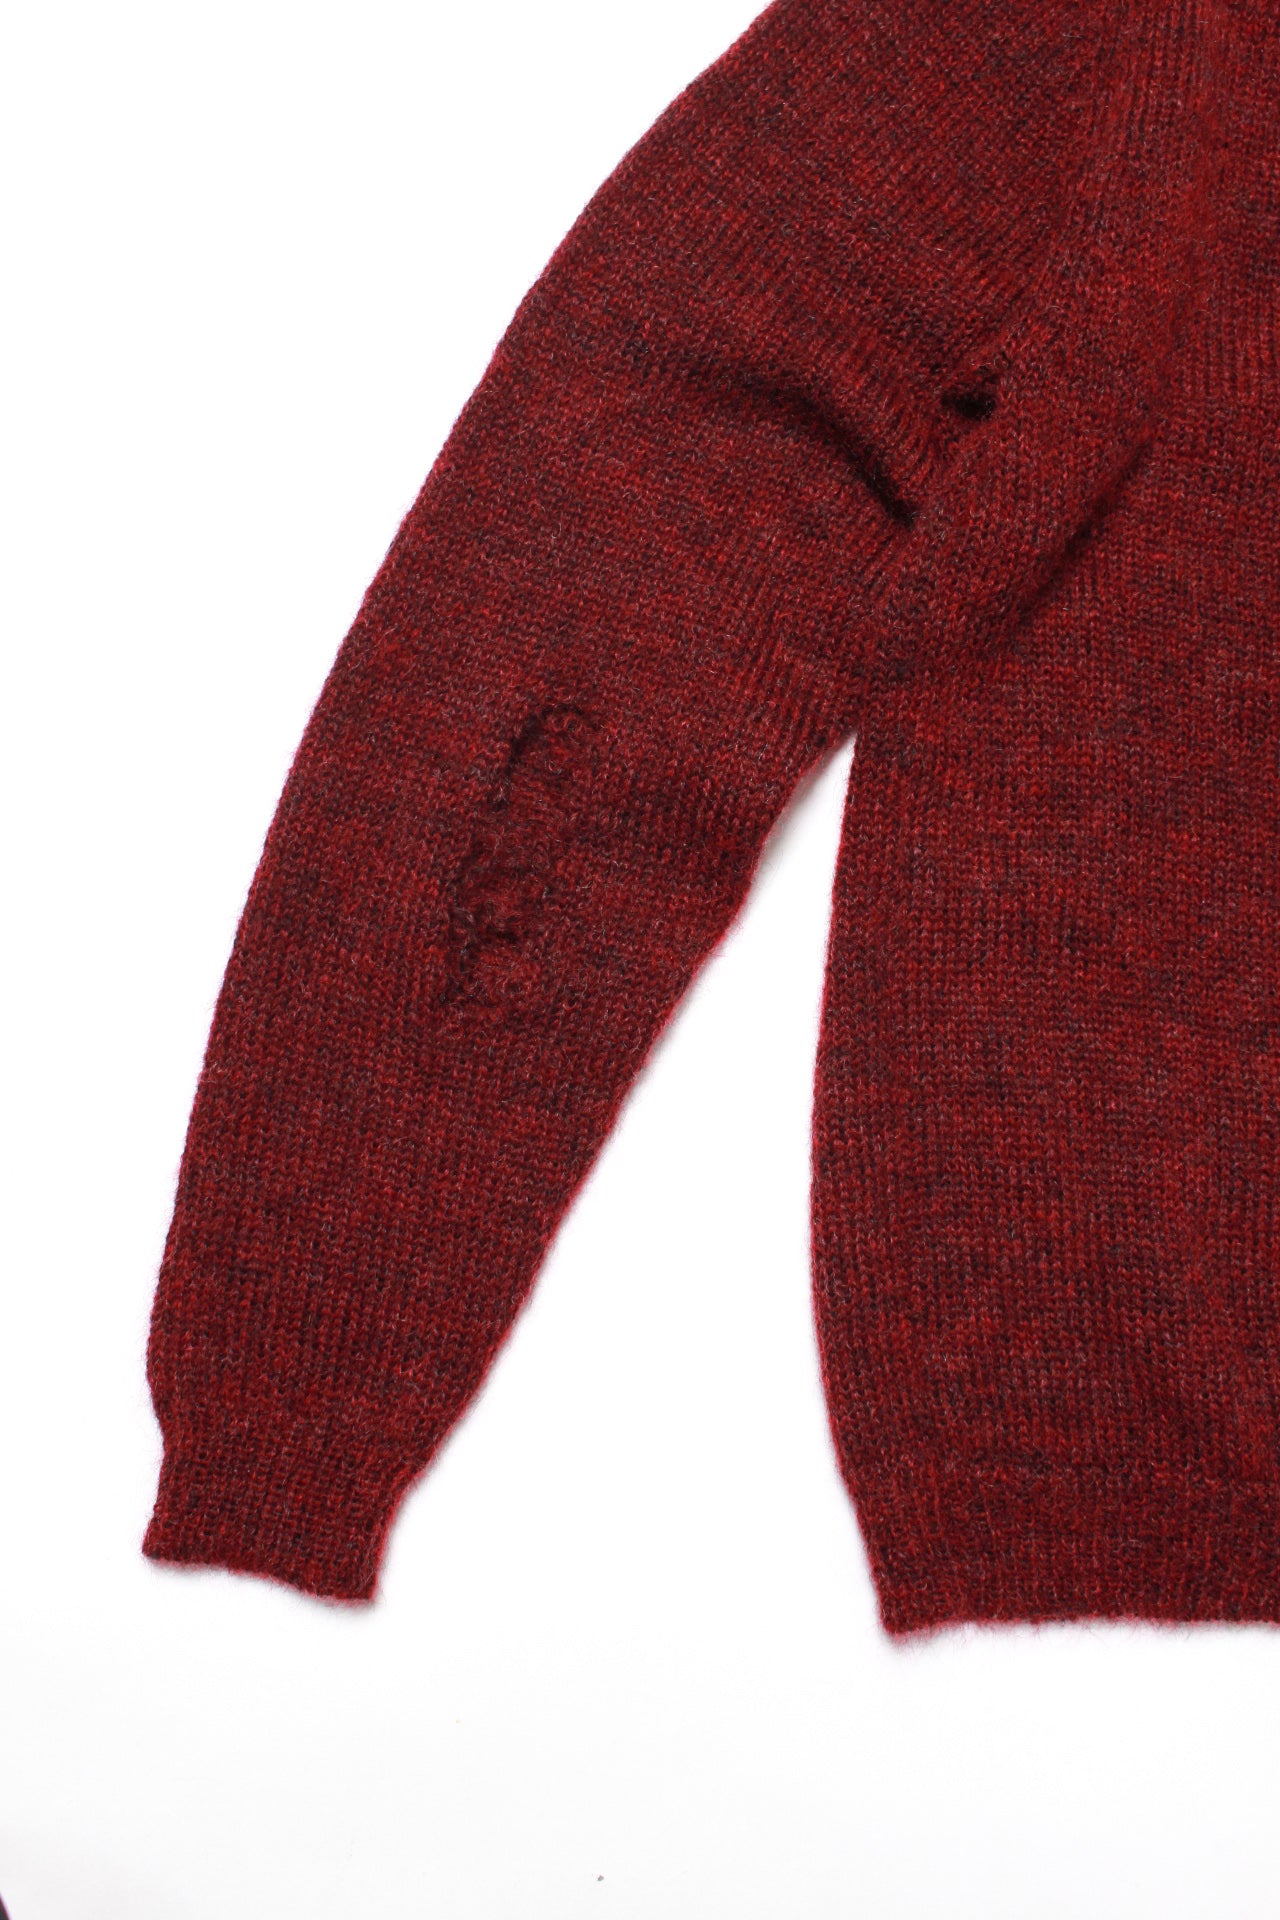 MOHAIR CARDIGAN CRUSH – C30 - BOW WOW, RECOGNIZE FLAGSHIP SHOP